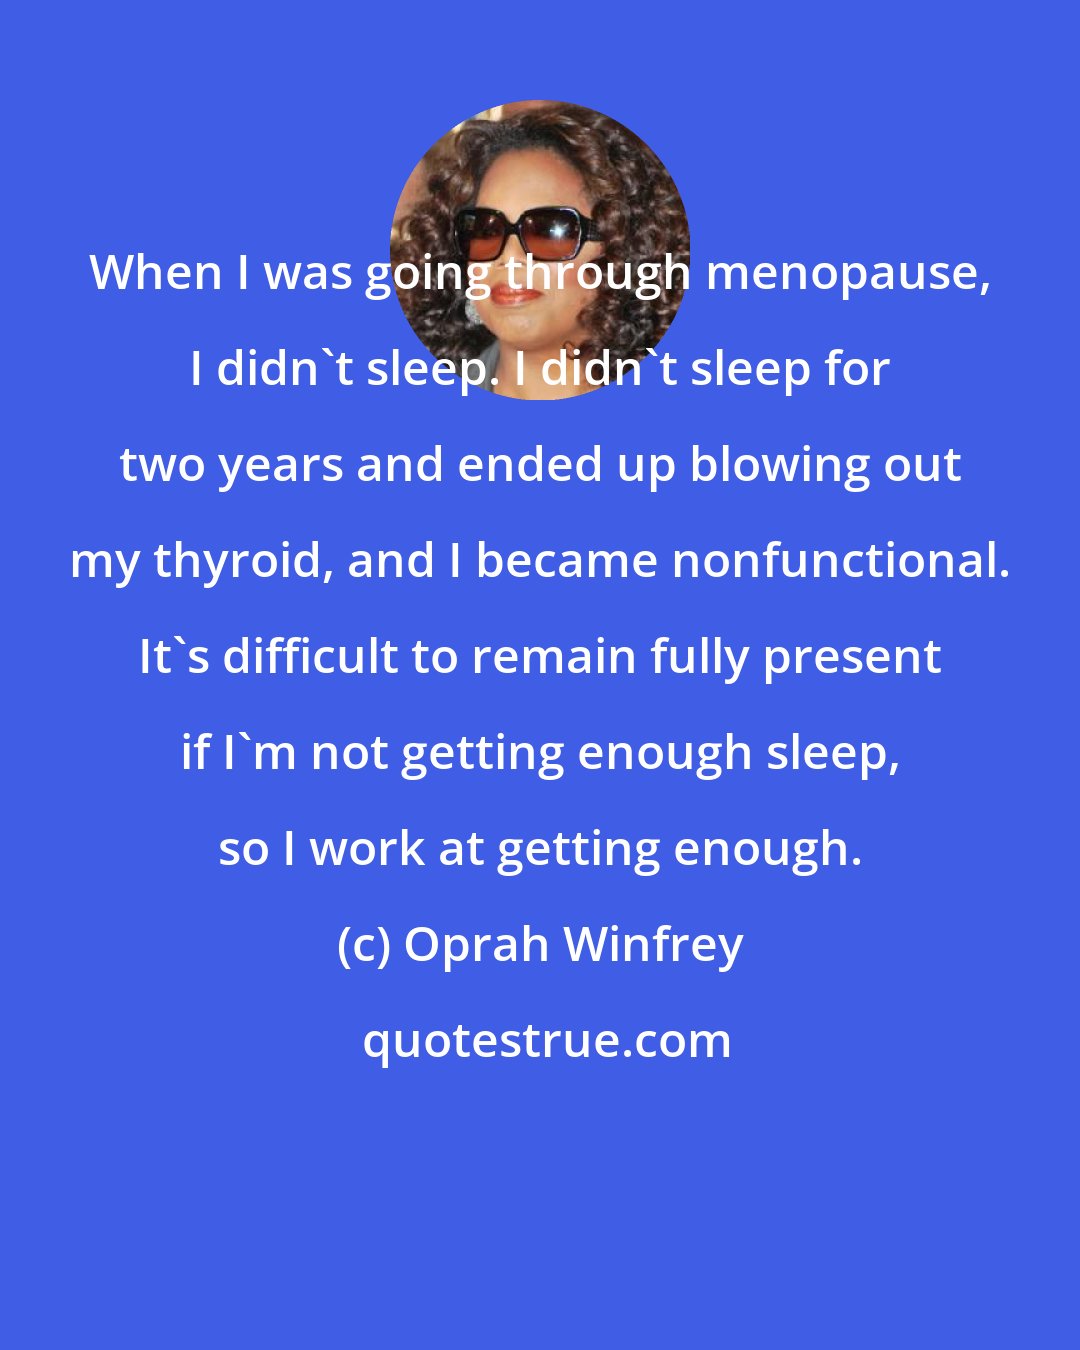 Oprah Winfrey: When I was going through menopause, I didn't sleep. I didn't sleep for two years and ended up blowing out my thyroid, and I became nonfunctional. It's difficult to remain fully present if I'm not getting enough sleep, so I work at getting enough.